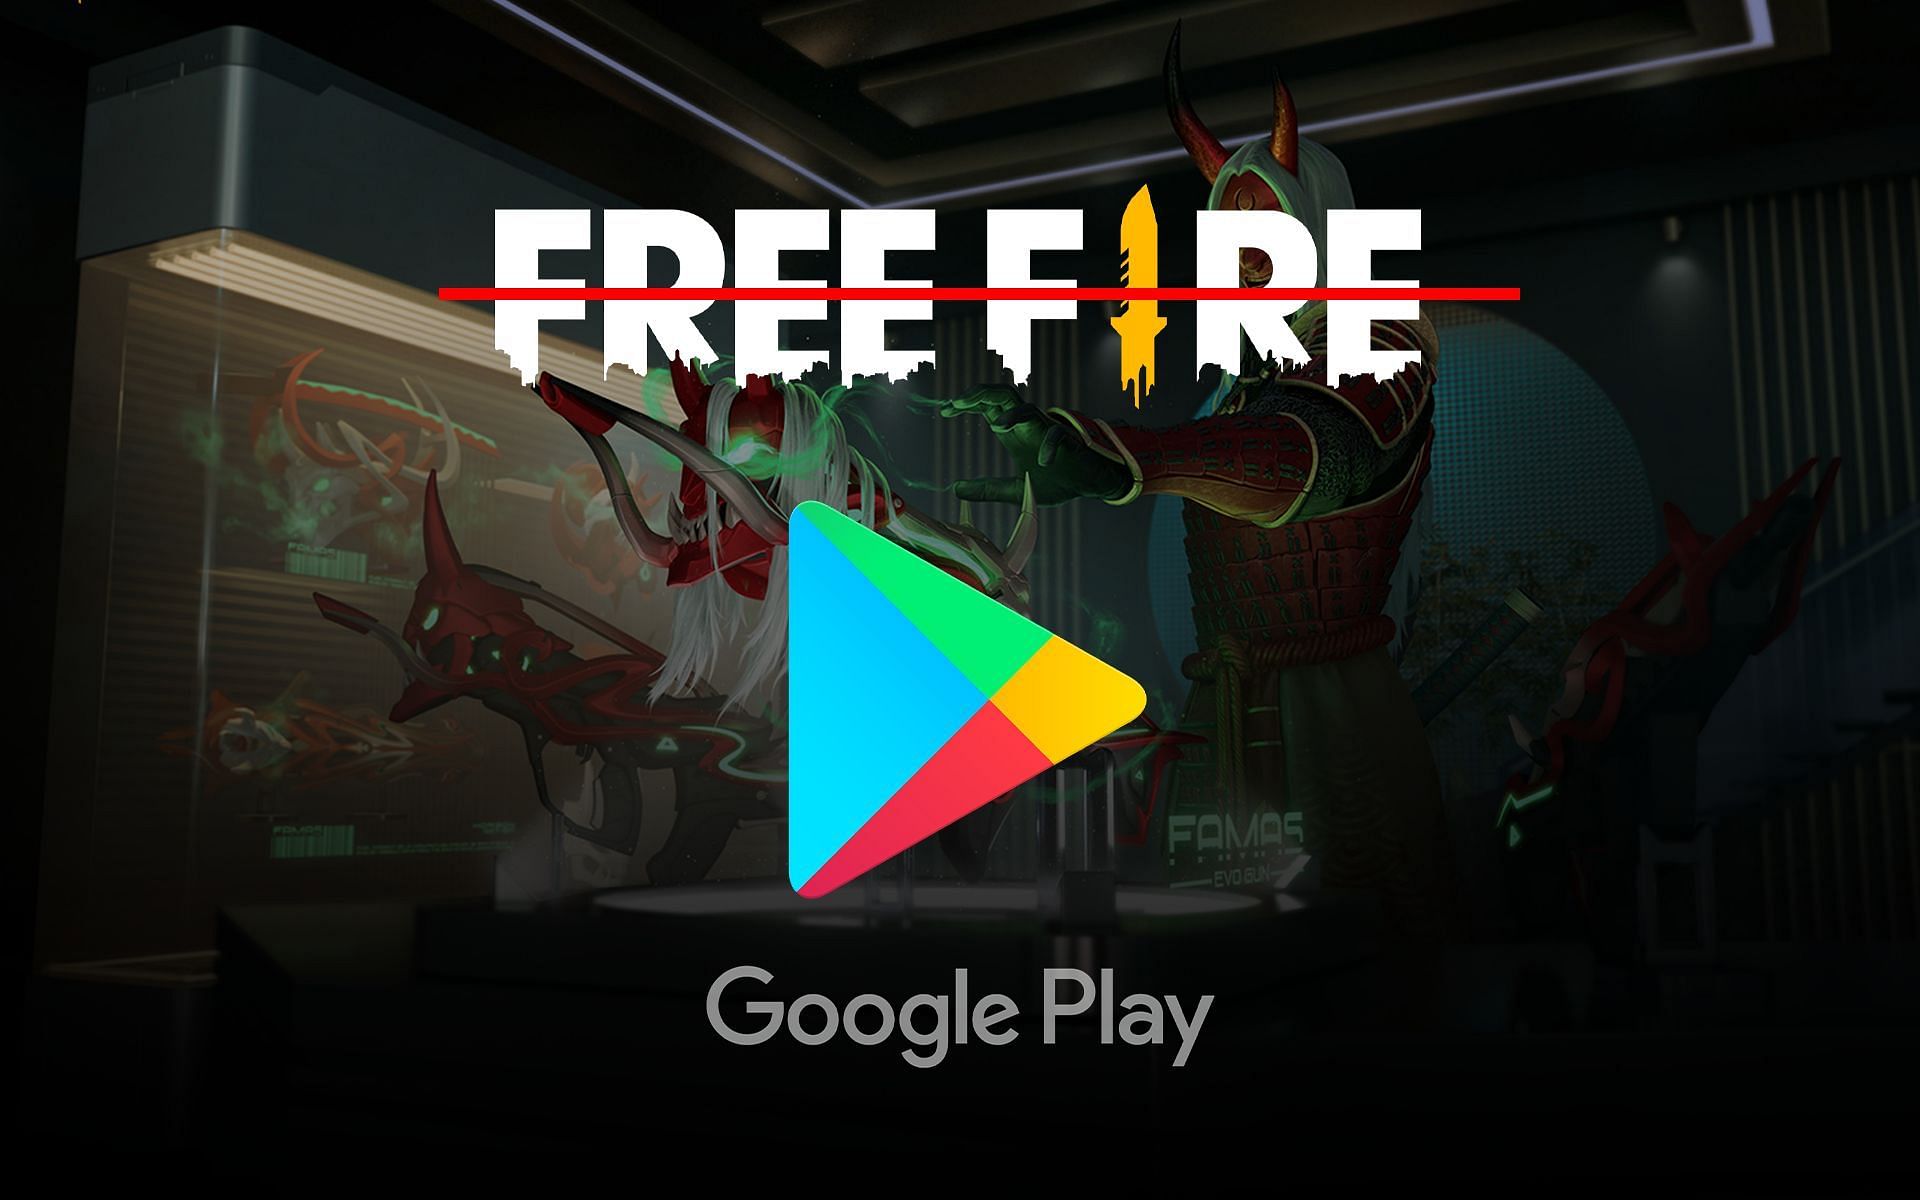 Chinese Apps Banned In India (Free Fire Ban)